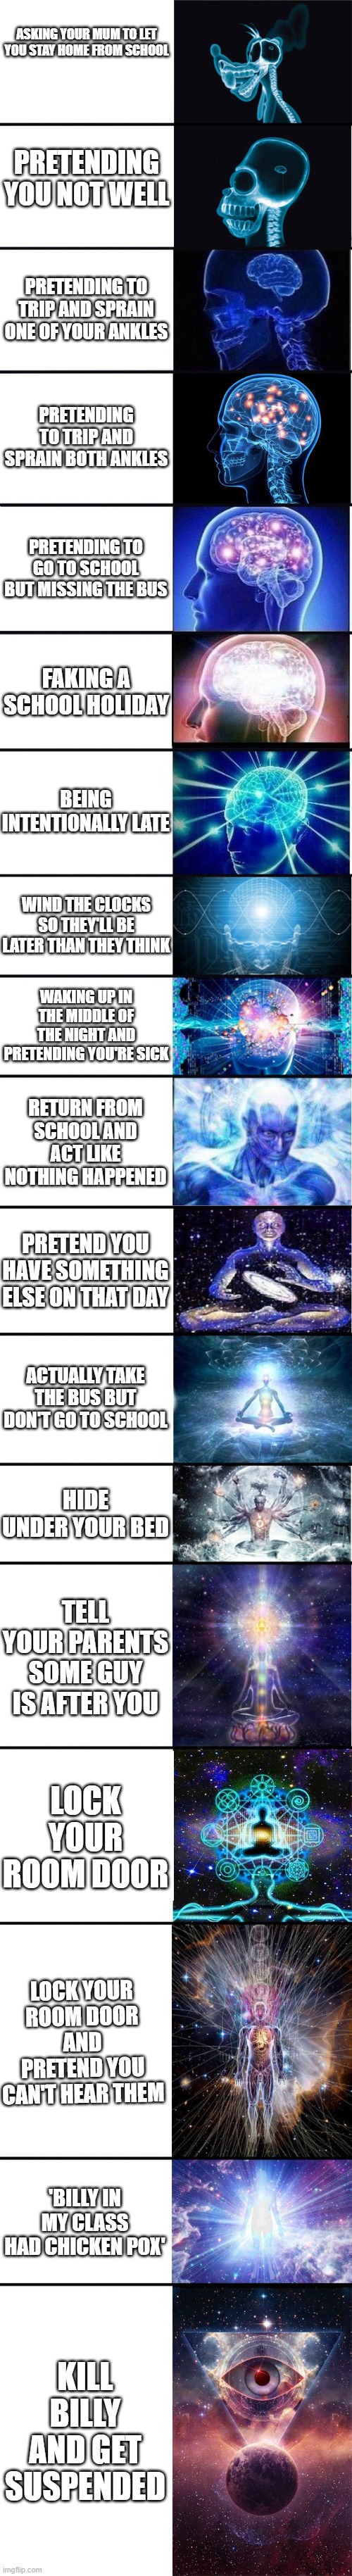 how to avoid going to school | ASKING YOUR MUM TO LET YOU STAY HOME FROM SCHOOL; PRETENDING YOU NOT WELL; PRETENDING TO TRIP AND SPRAIN ONE OF YOUR ANKLES; PRETENDING TO TRIP AND SPRAIN BOTH ANKLES; PRETENDING TO GO TO SCHOOL BUT MISSING THE BUS; FAKING A SCHOOL HOLIDAY; BEING INTENTIONALLY LATE; WIND THE CLOCKS SO THEY'LL BE LATER THAN THEY THINK; WAKING UP IN THE MIDDLE OF THE NIGHT AND PRETENDING YOU'RE SICK; RETURN FROM SCHOOL AND ACT LIKE NOTHING HAPPENED; PRETEND YOU HAVE SOMETHING ELSE ON THAT DAY; ACTUALLY TAKE THE BUS BUT DON'T GO TO SCHOOL; HIDE UNDER YOUR BED; TELL YOUR PARENTS SOME GUY IS AFTER YOU; LOCK YOUR ROOM DOOR; LOCK YOUR ROOM DOOR AND PRETEND YOU CAN'T HEAR THEM; 'BILLY IN MY CLASS HAD CHICKEN POX'; KILL BILLY AND GET SUSPENDED | image tagged in lol | made w/ Imgflip meme maker